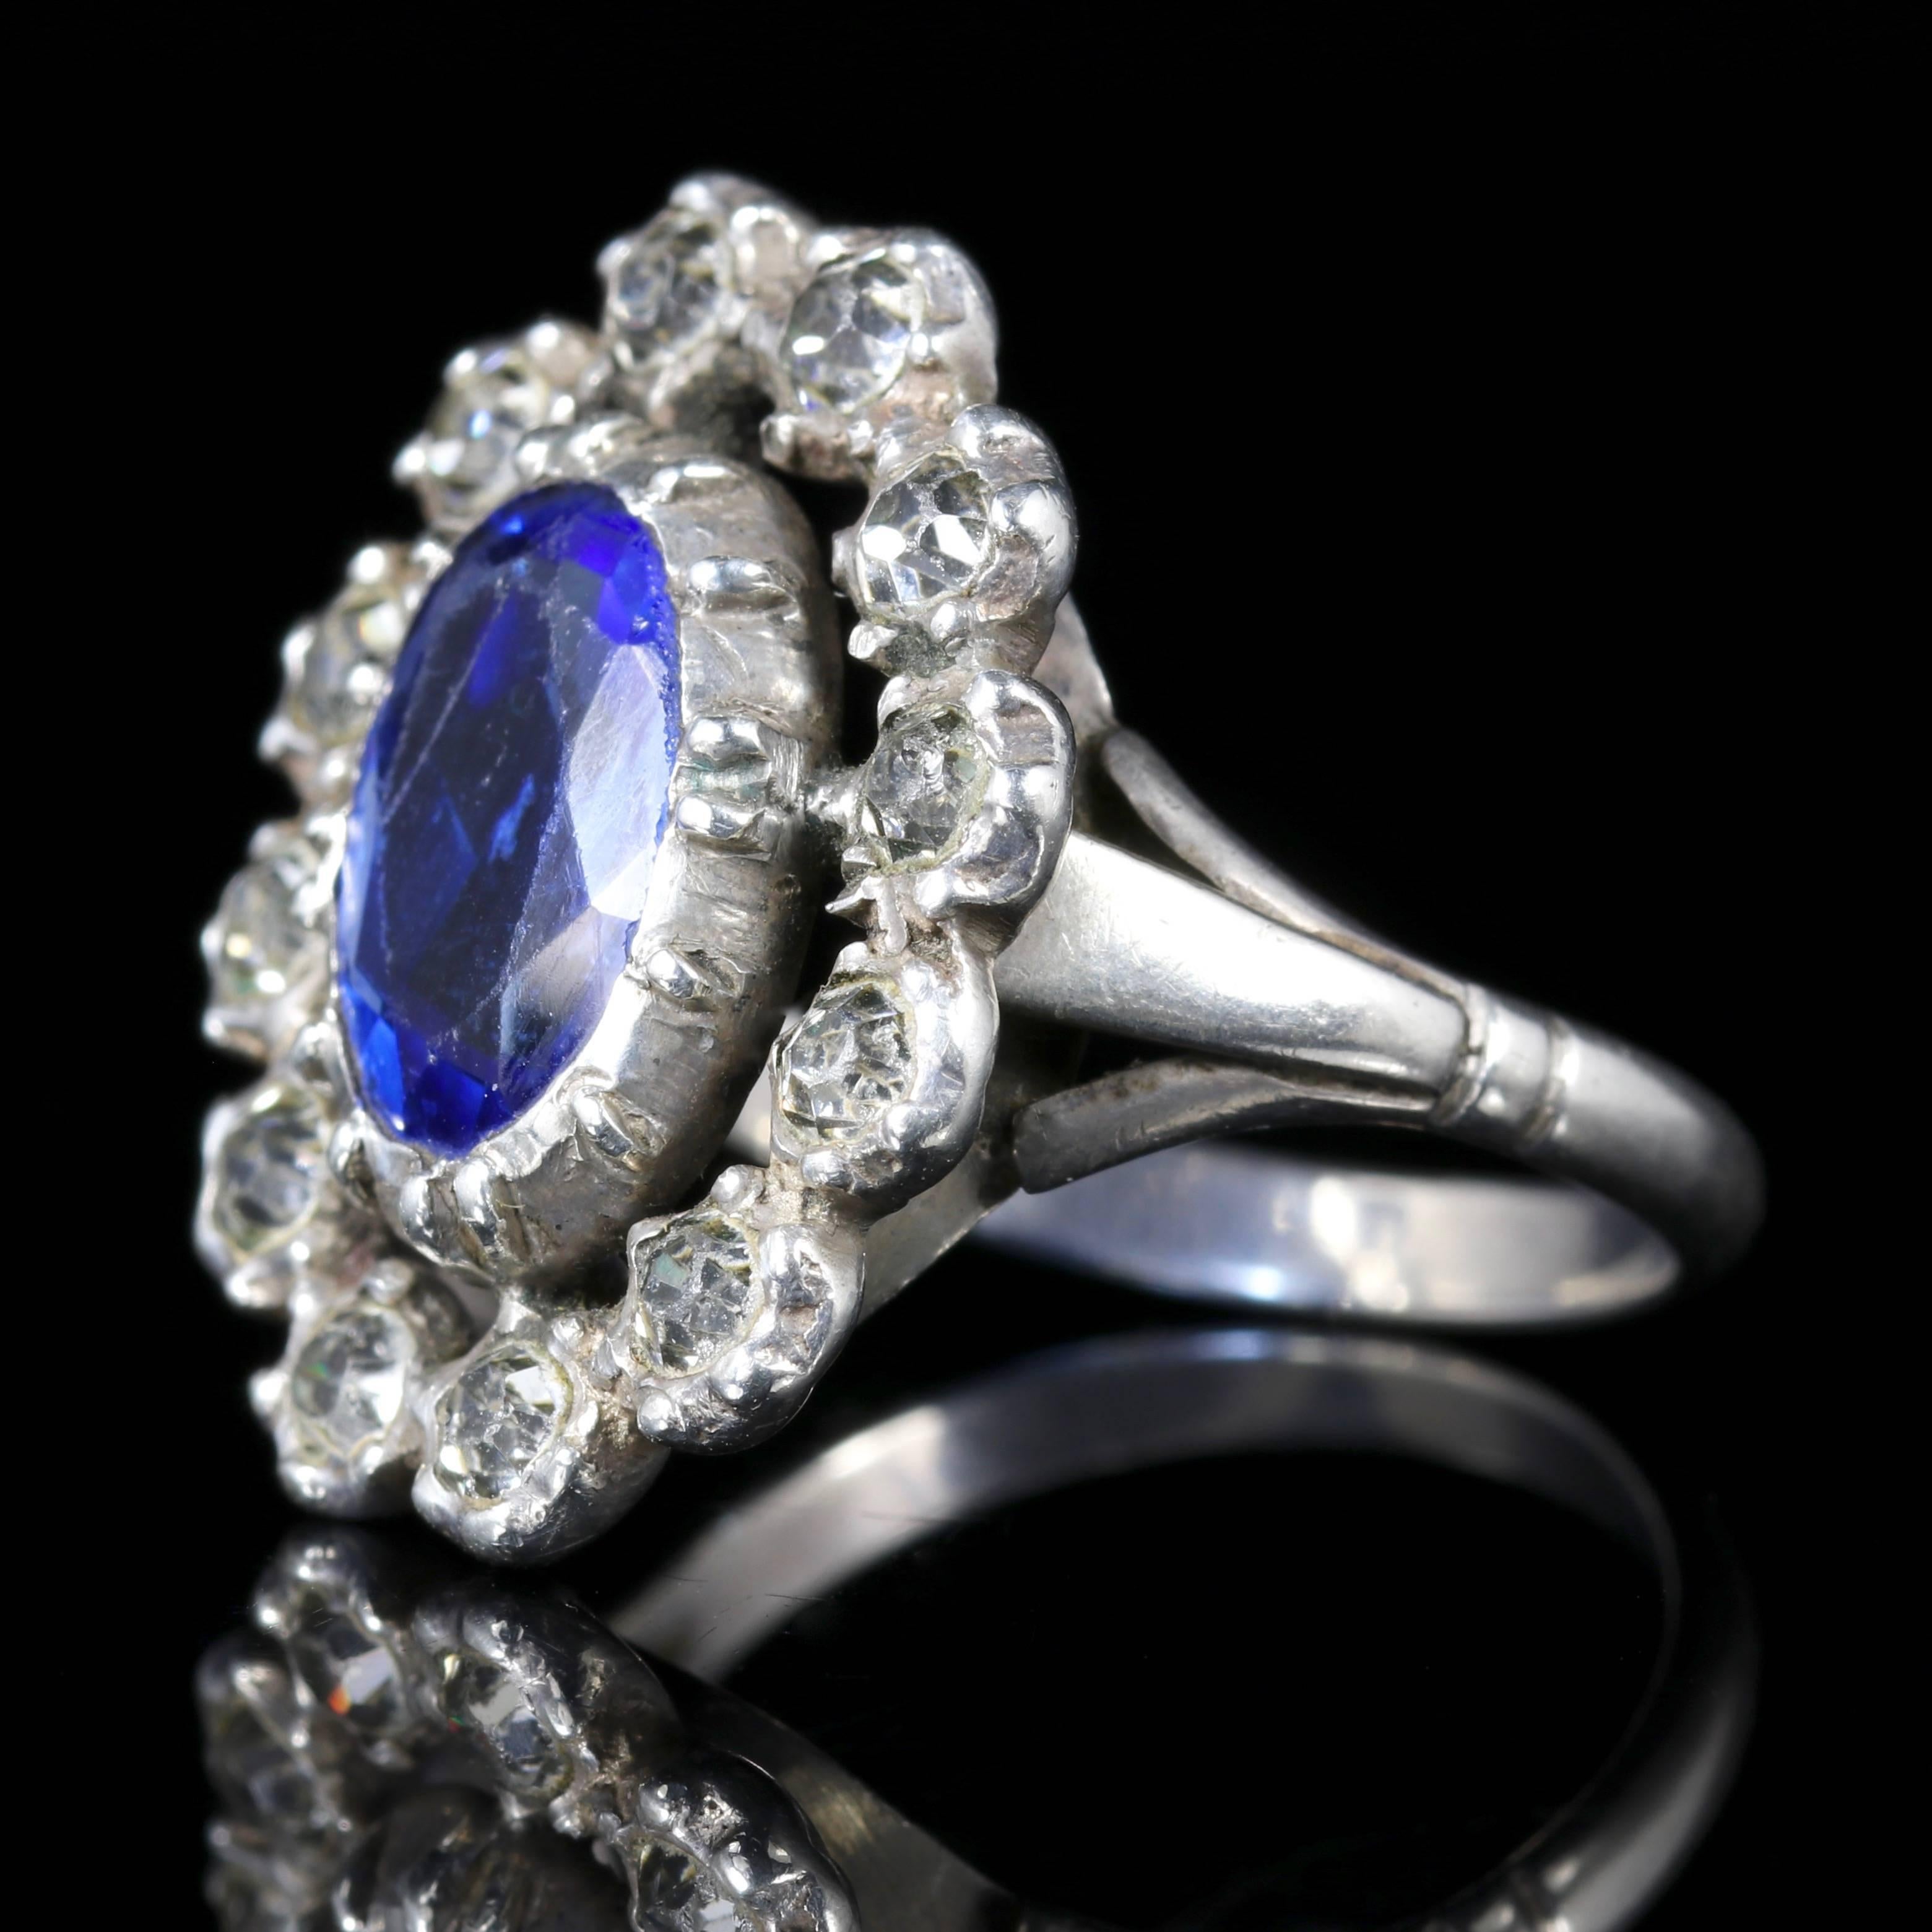 This fabulous Georgian Antique Paste ring is set with a lovely central deep blue Paste Stone surrounded by white Old Cut Paste Stones.

The ring is Georgian Circa 1800.

The blue central Paste Stone measures over 4ct in size.

Old Cut Paste Stones